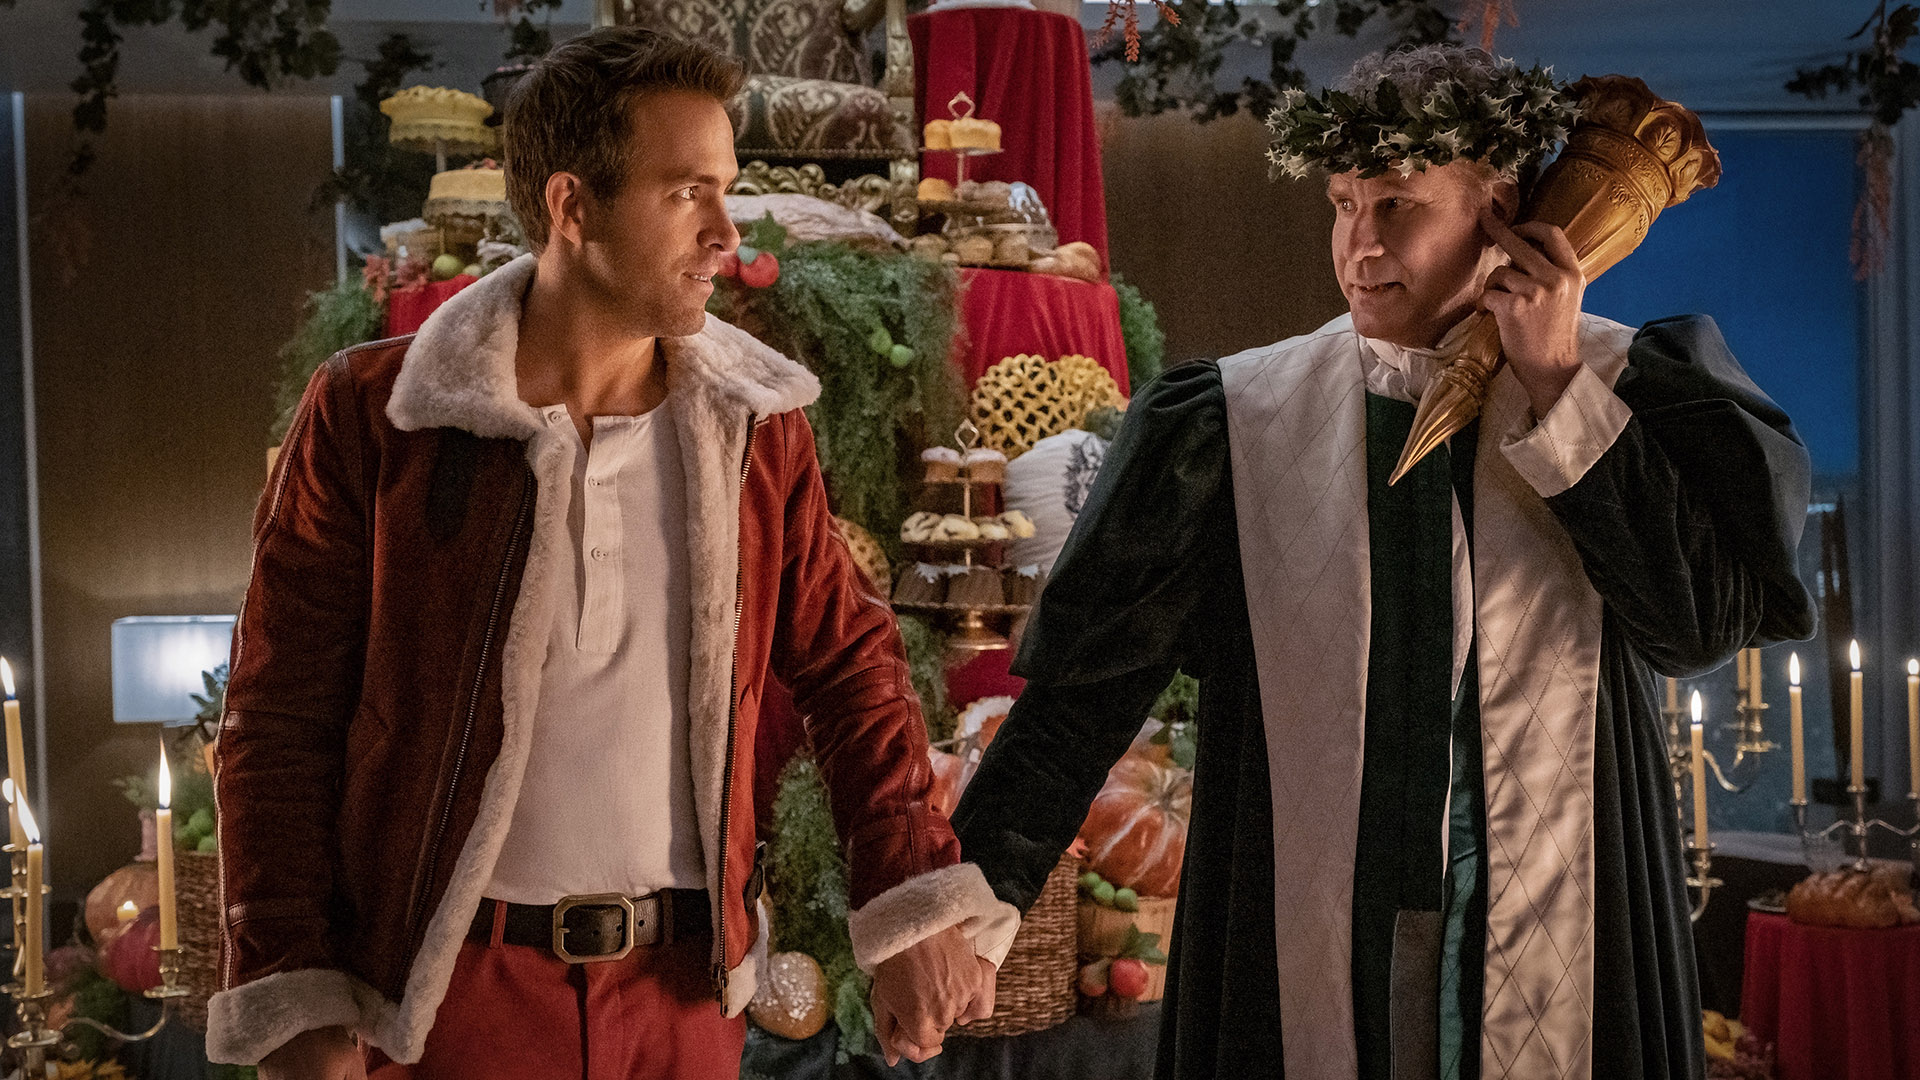 Ryan Reynolds and Will Ferrell in "Spirited," coming soon to Apple TV+. Photo: Apple TV+